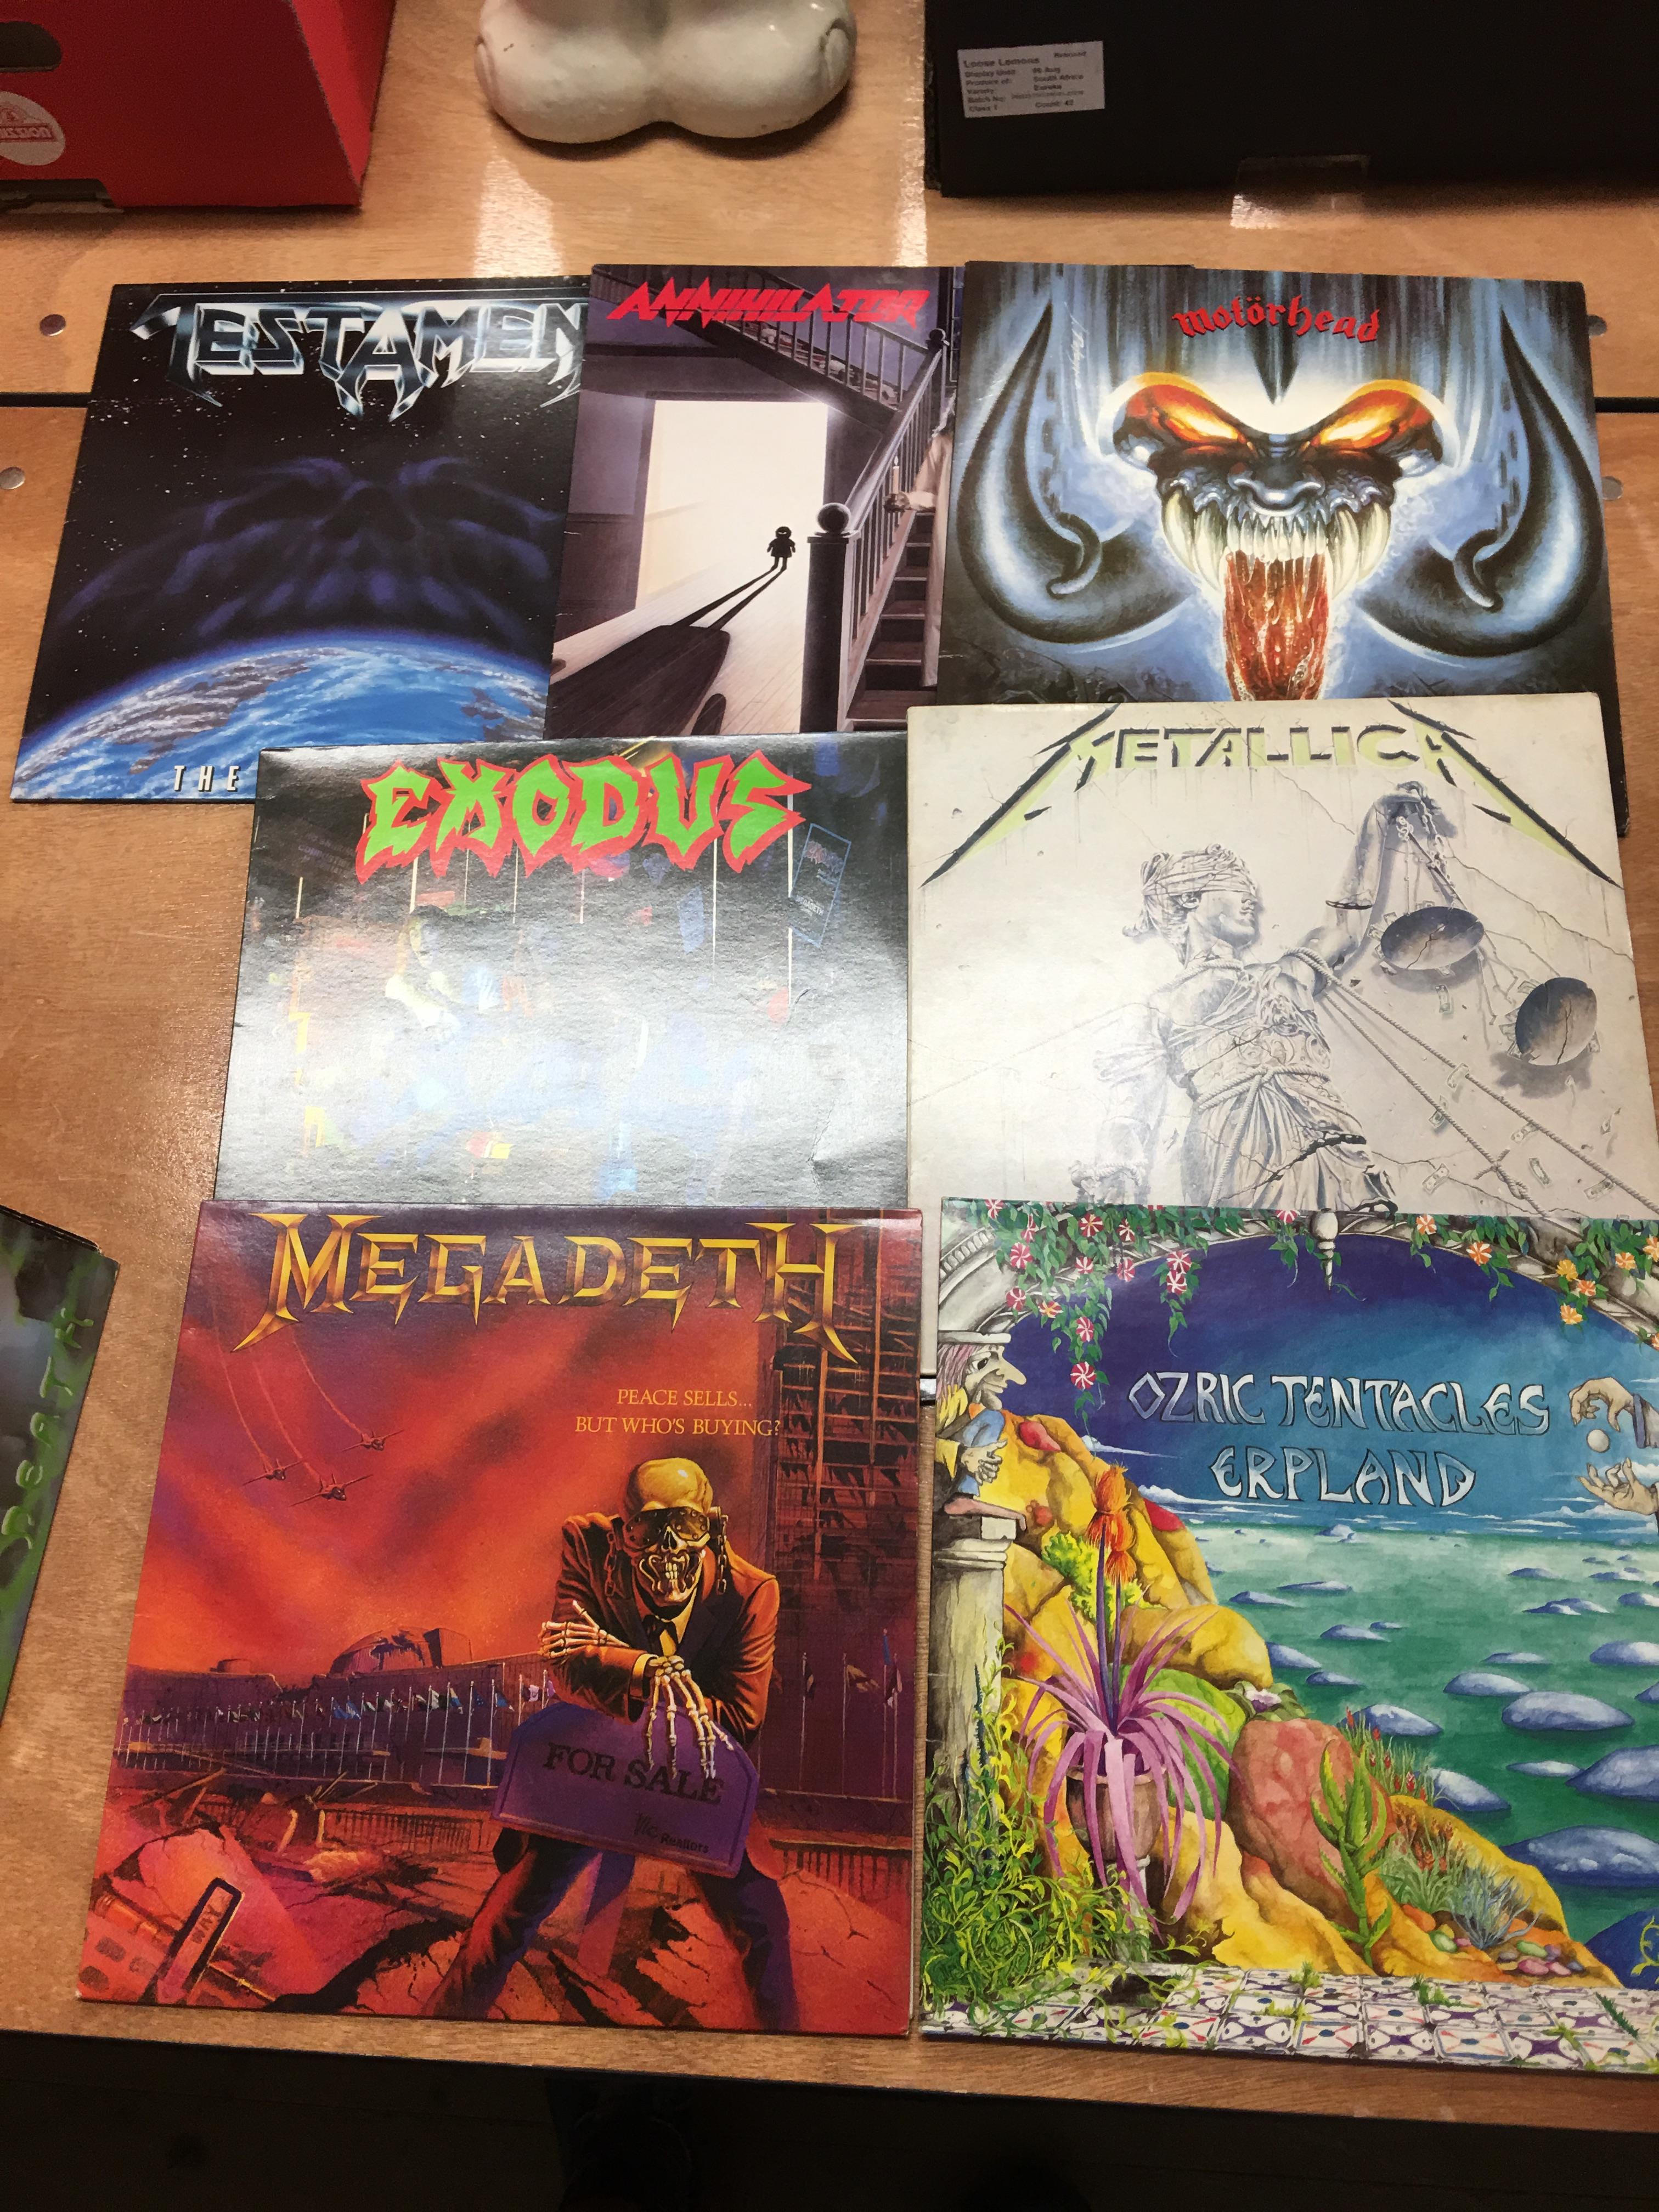 A box of heavy metal vinyl records, including a signed 'Steve Vai' album - Image 11 of 12